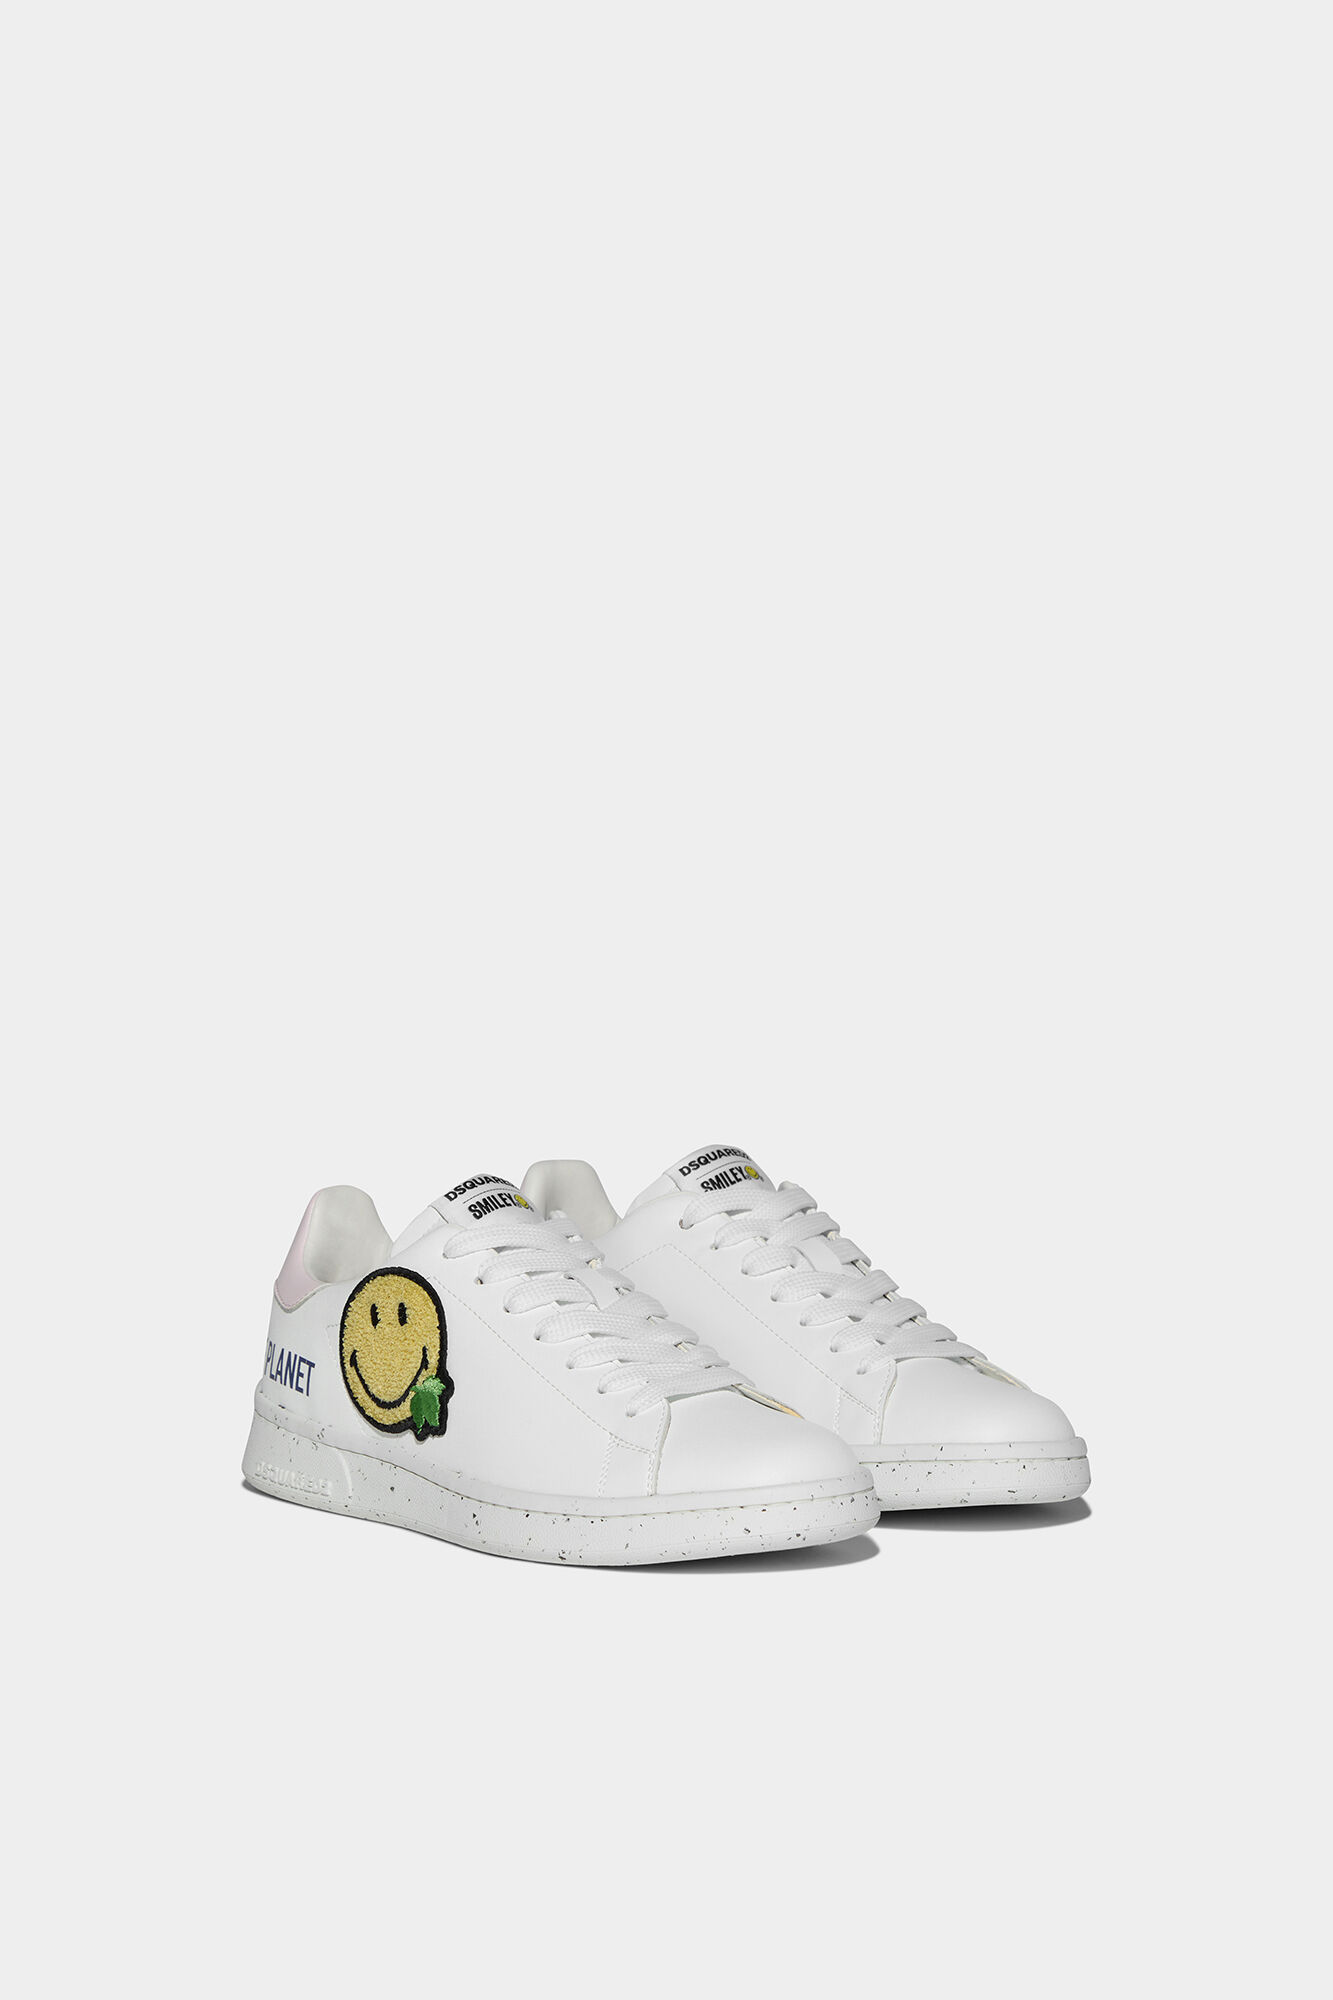 Smiley Bypell Boxer Sneakers Sneakers